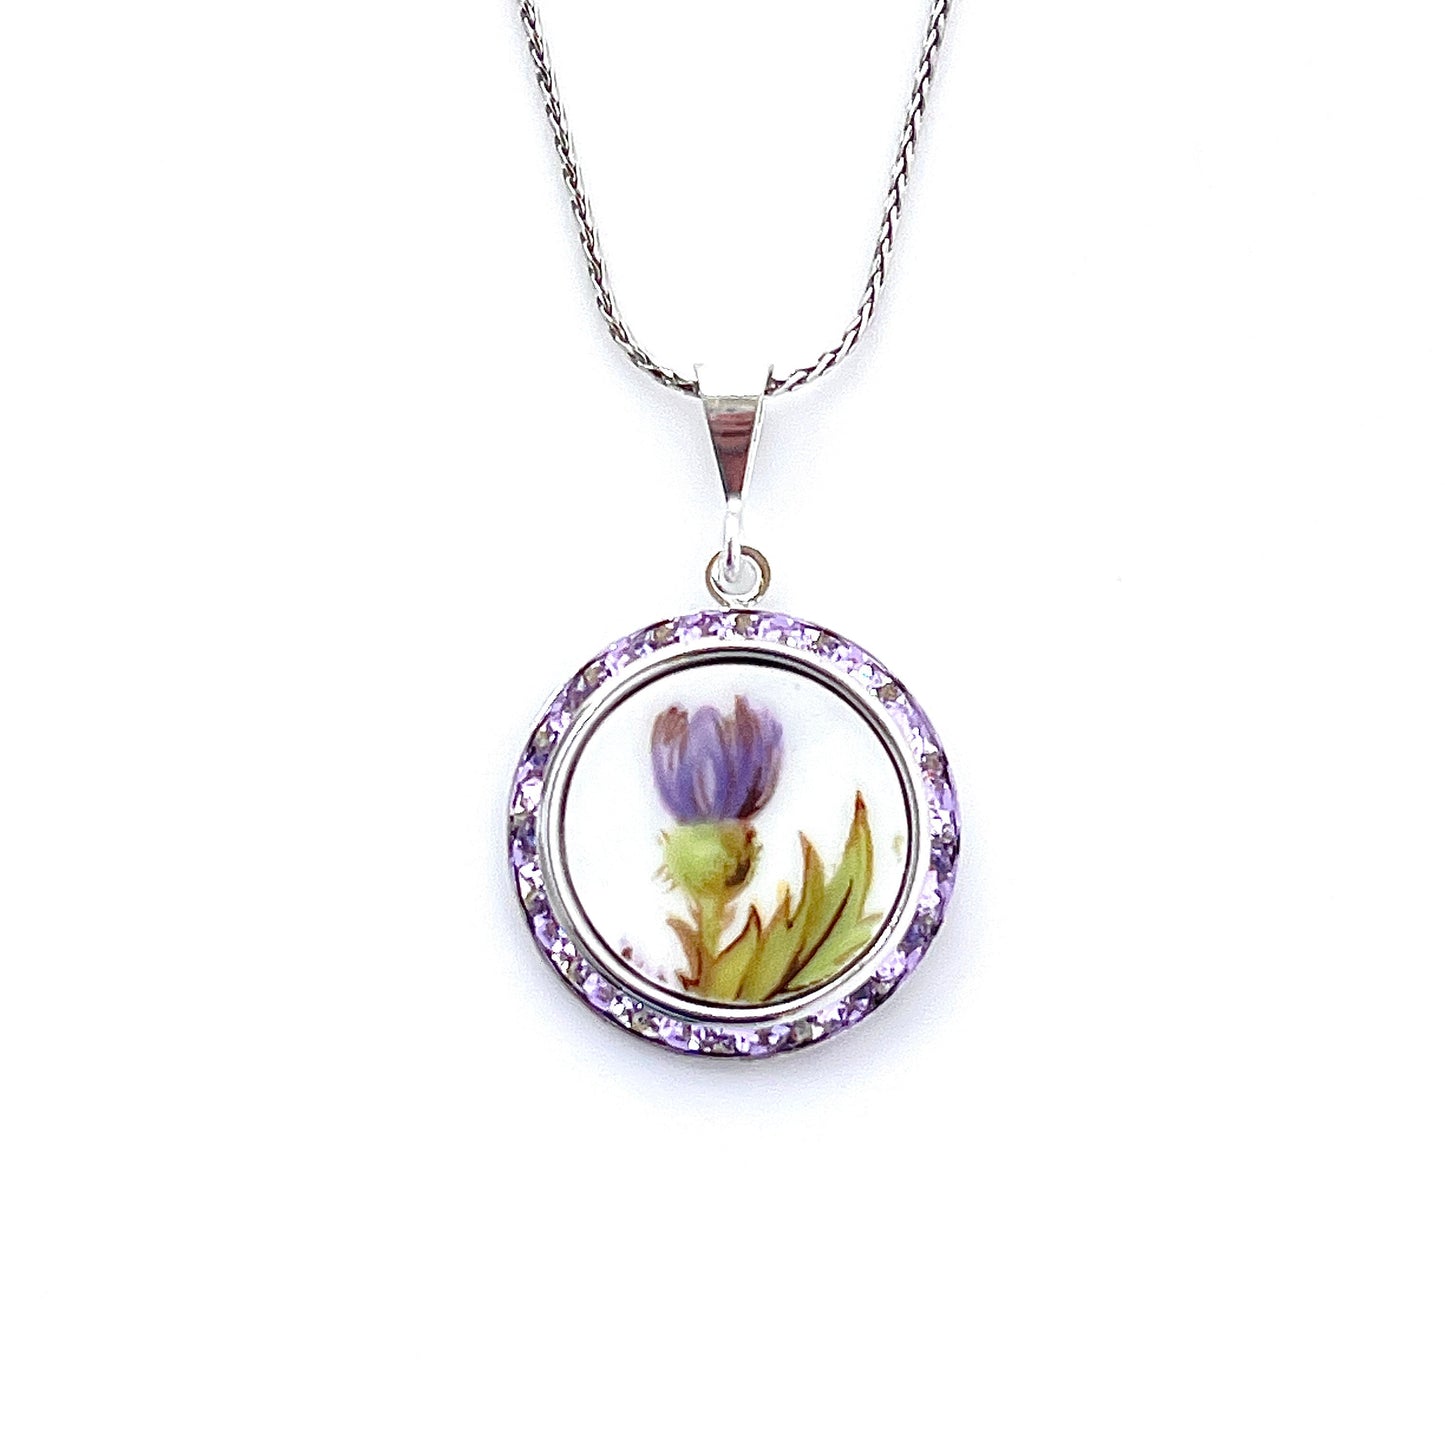 Scottish Thistle China Necklace, Unique Scottish Gifts for Women, Crystal Necklace, Broken China Jewelry, Thistle Jewelry, Birthday Gifts